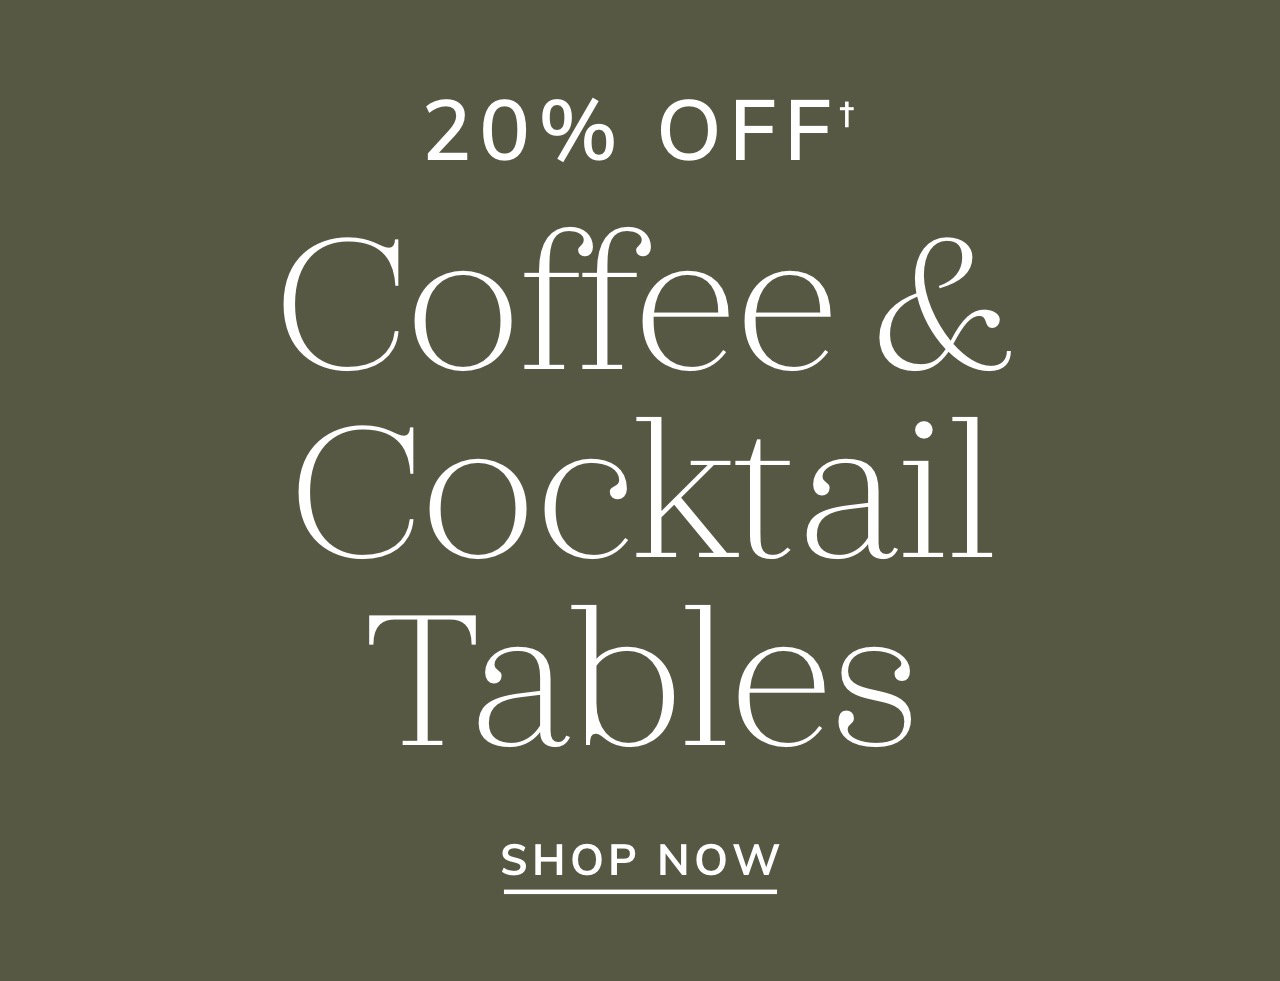 Coffee & Cocktail Tables